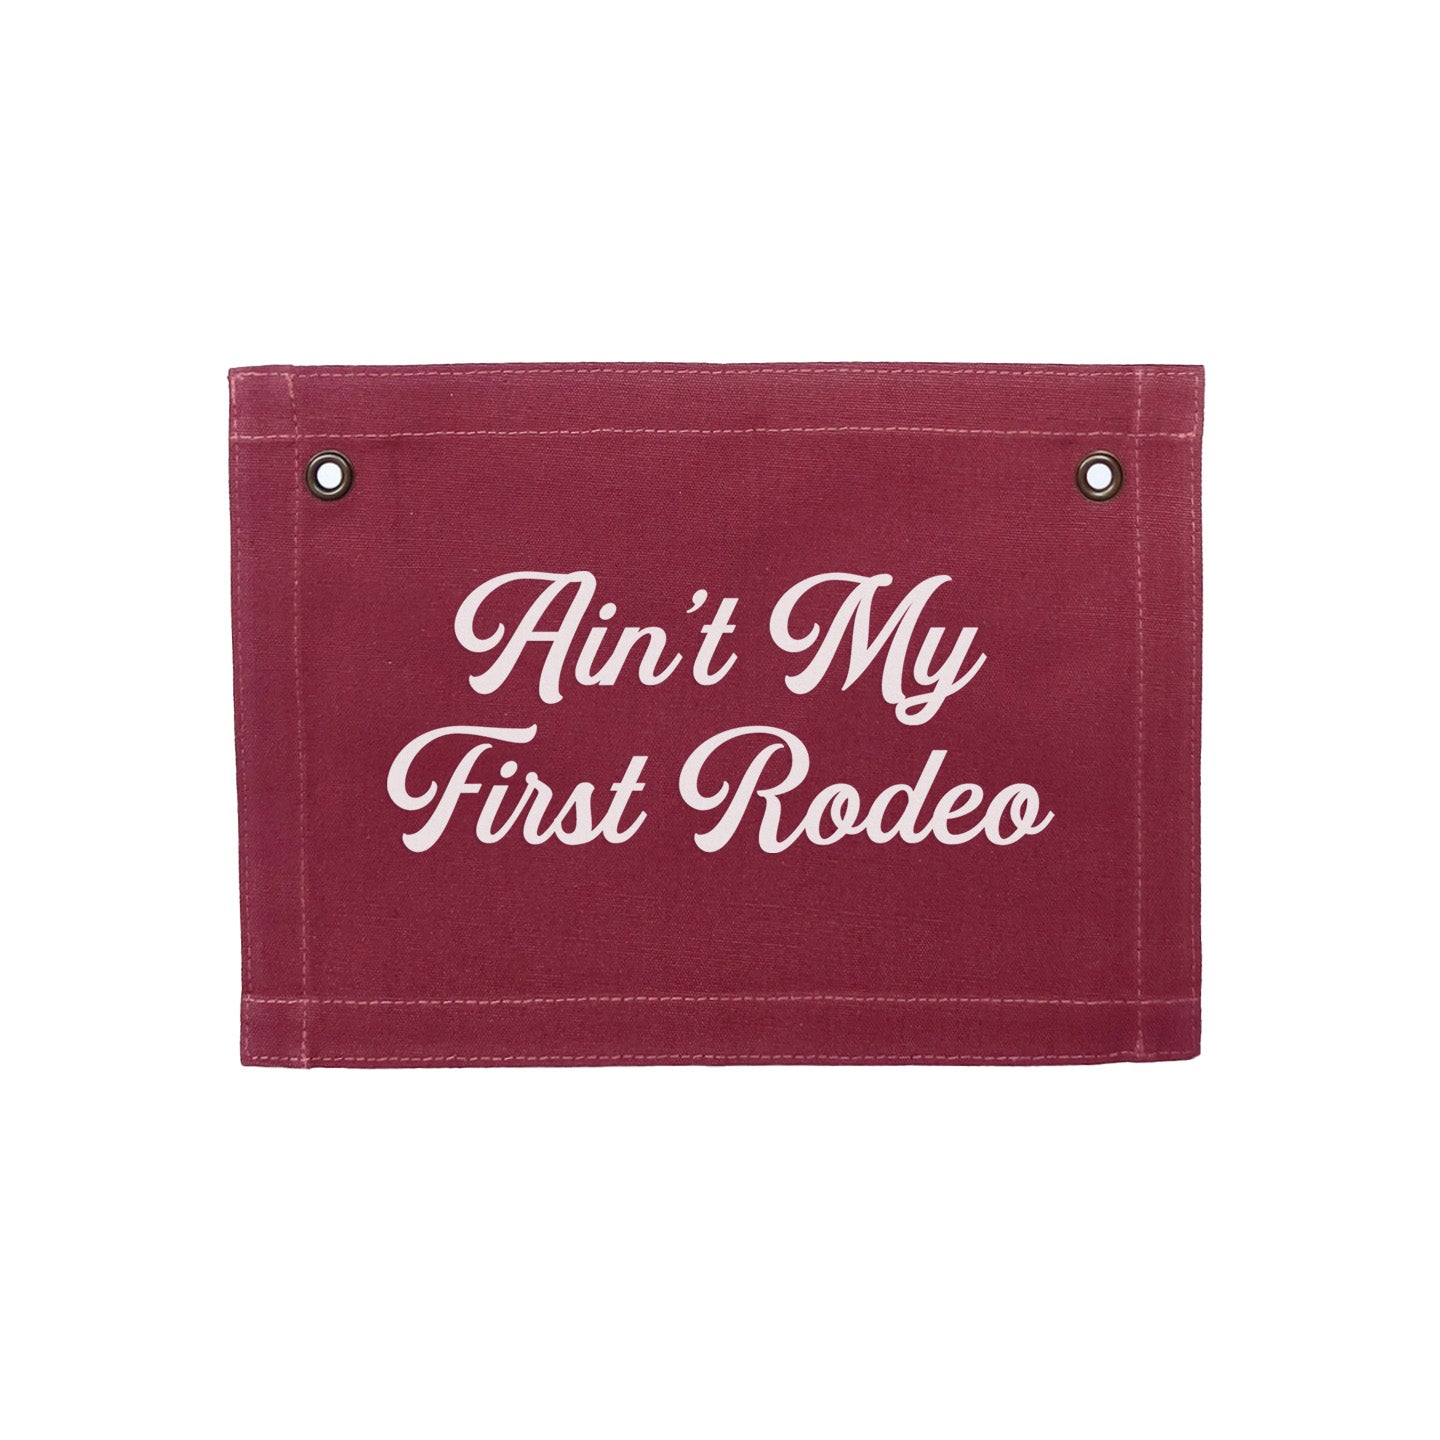 Ain't my First Rodeo Small Canvas Flag